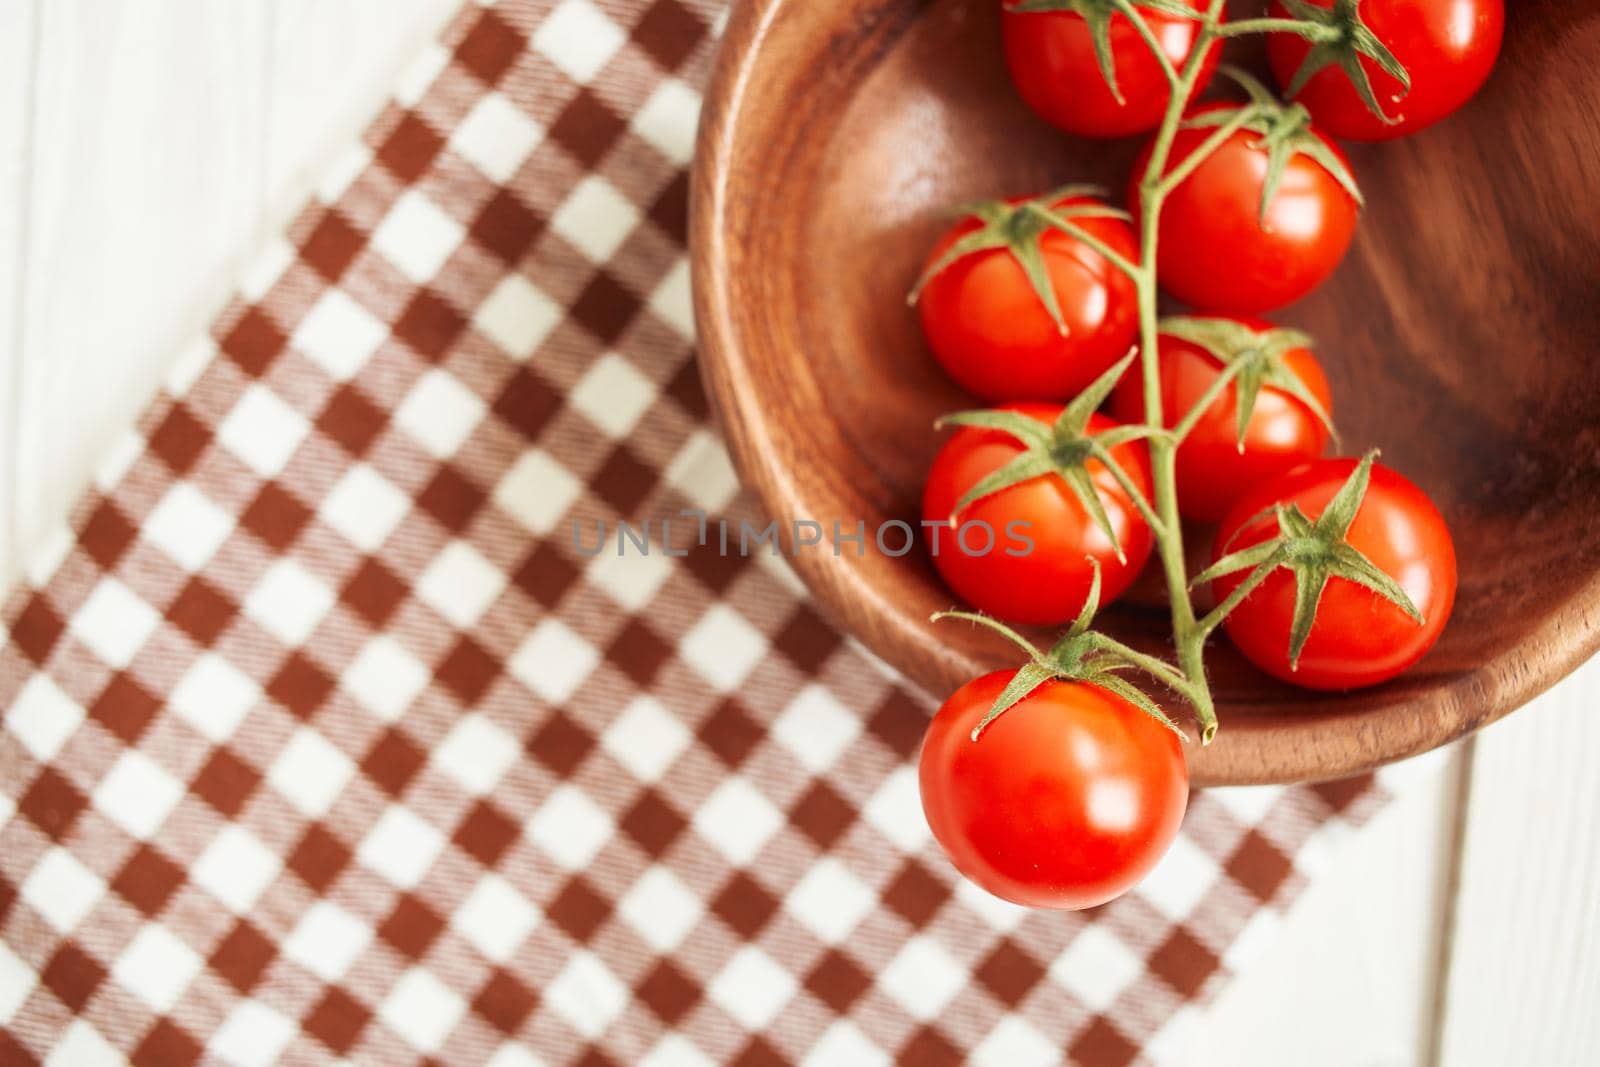 vegetables Cherry tomatoes on a cutting board wood background by Vichizh